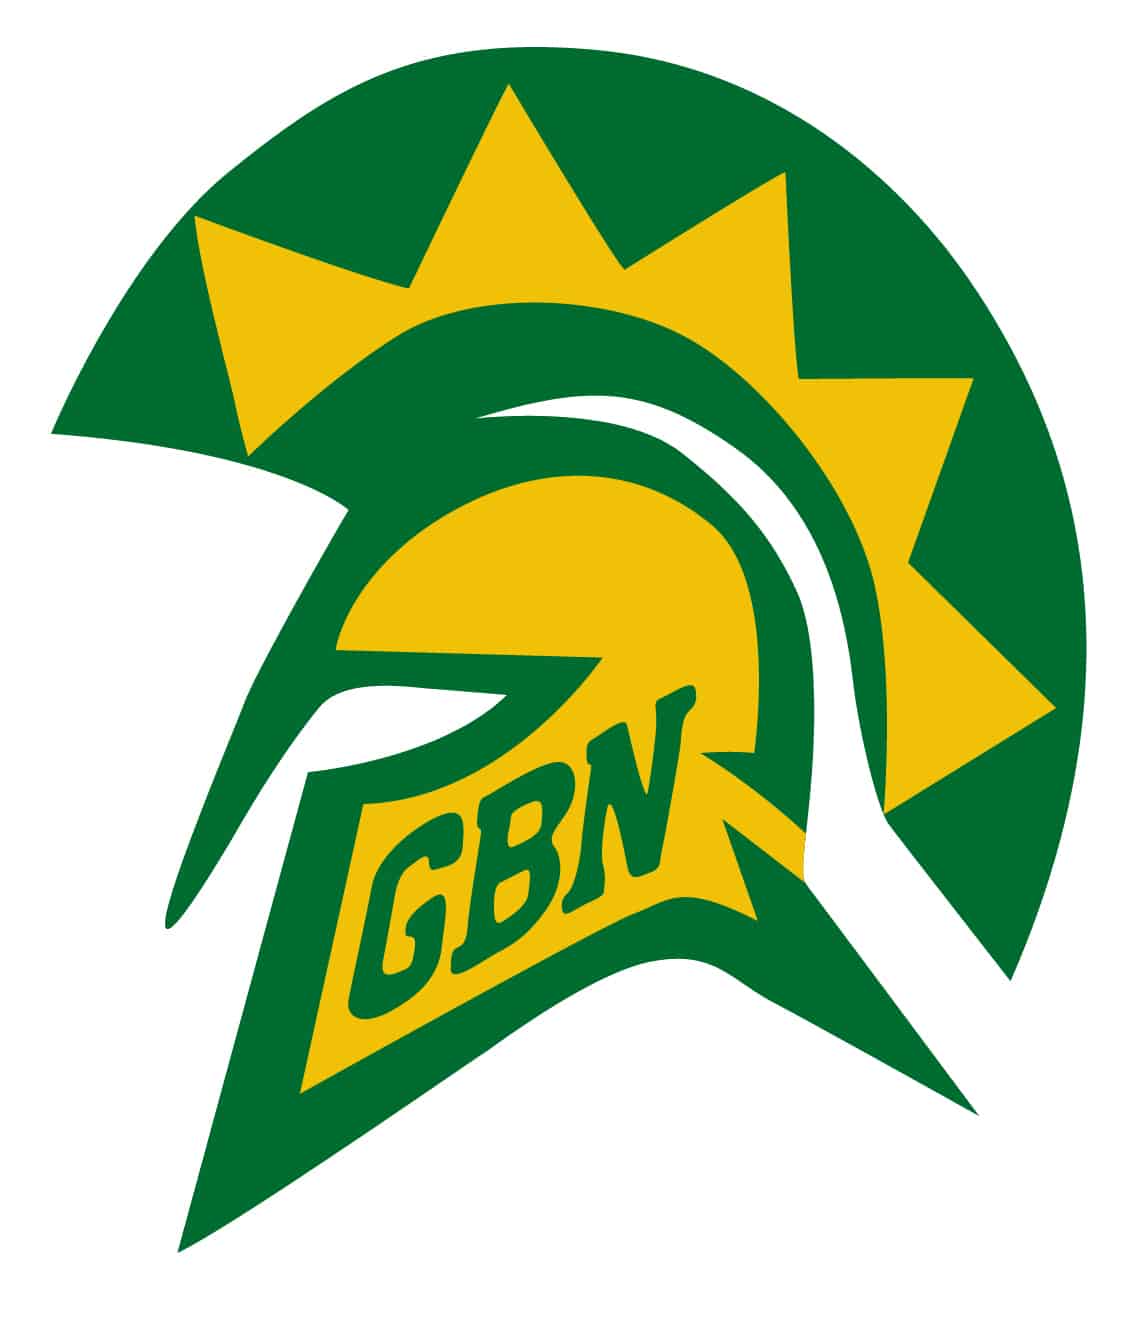 Gbn Logo - GBN Spartans Logo - Northbrook Park District